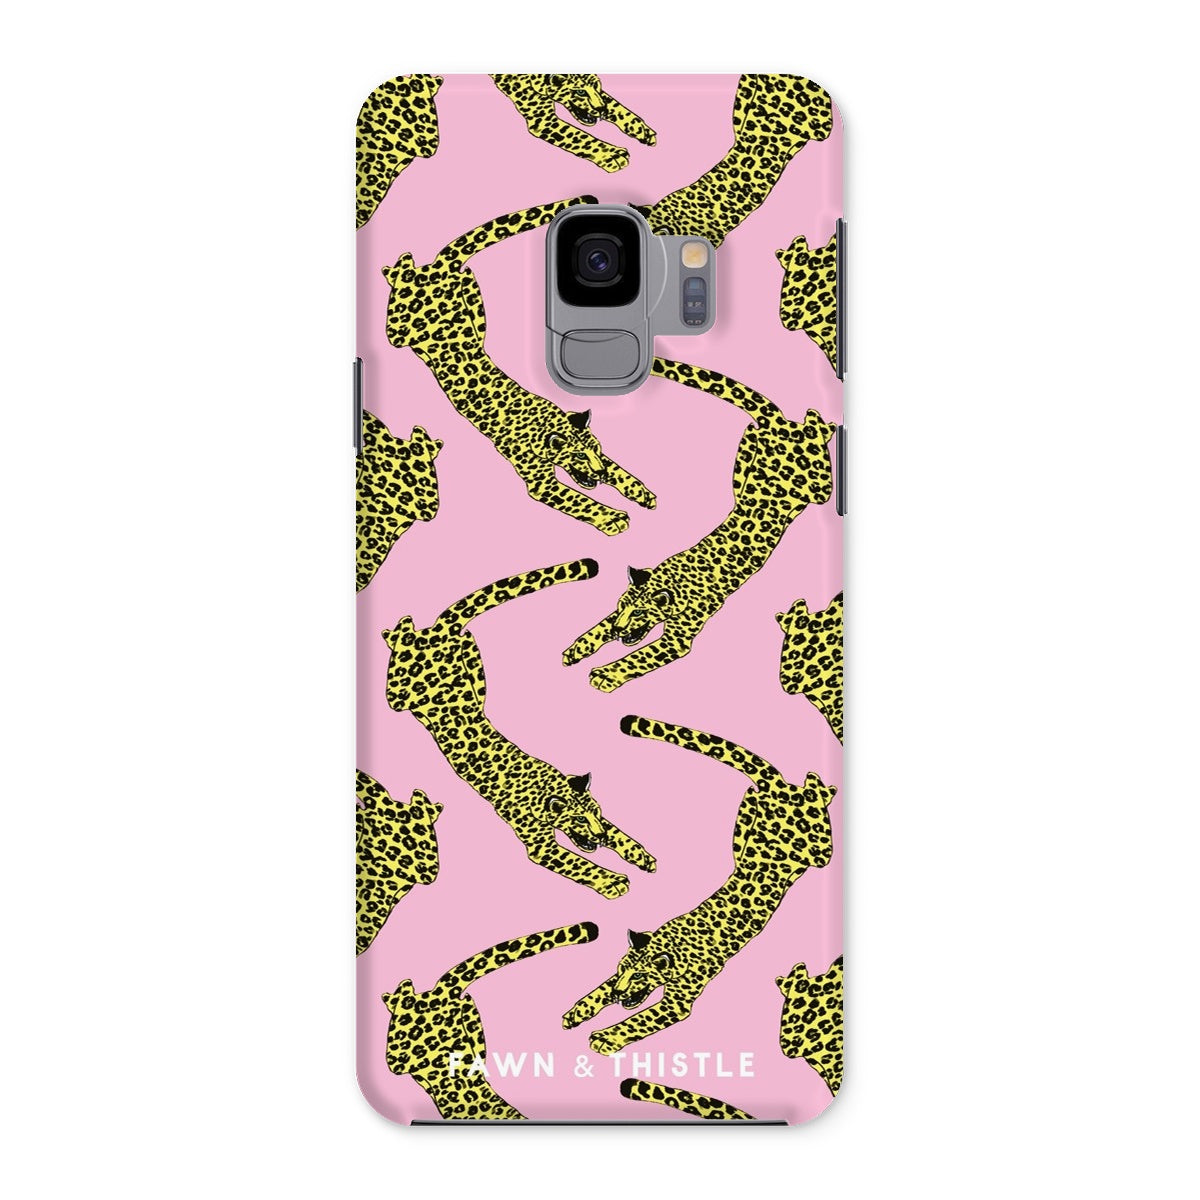 Leaping Leopard Pattern Phone Case